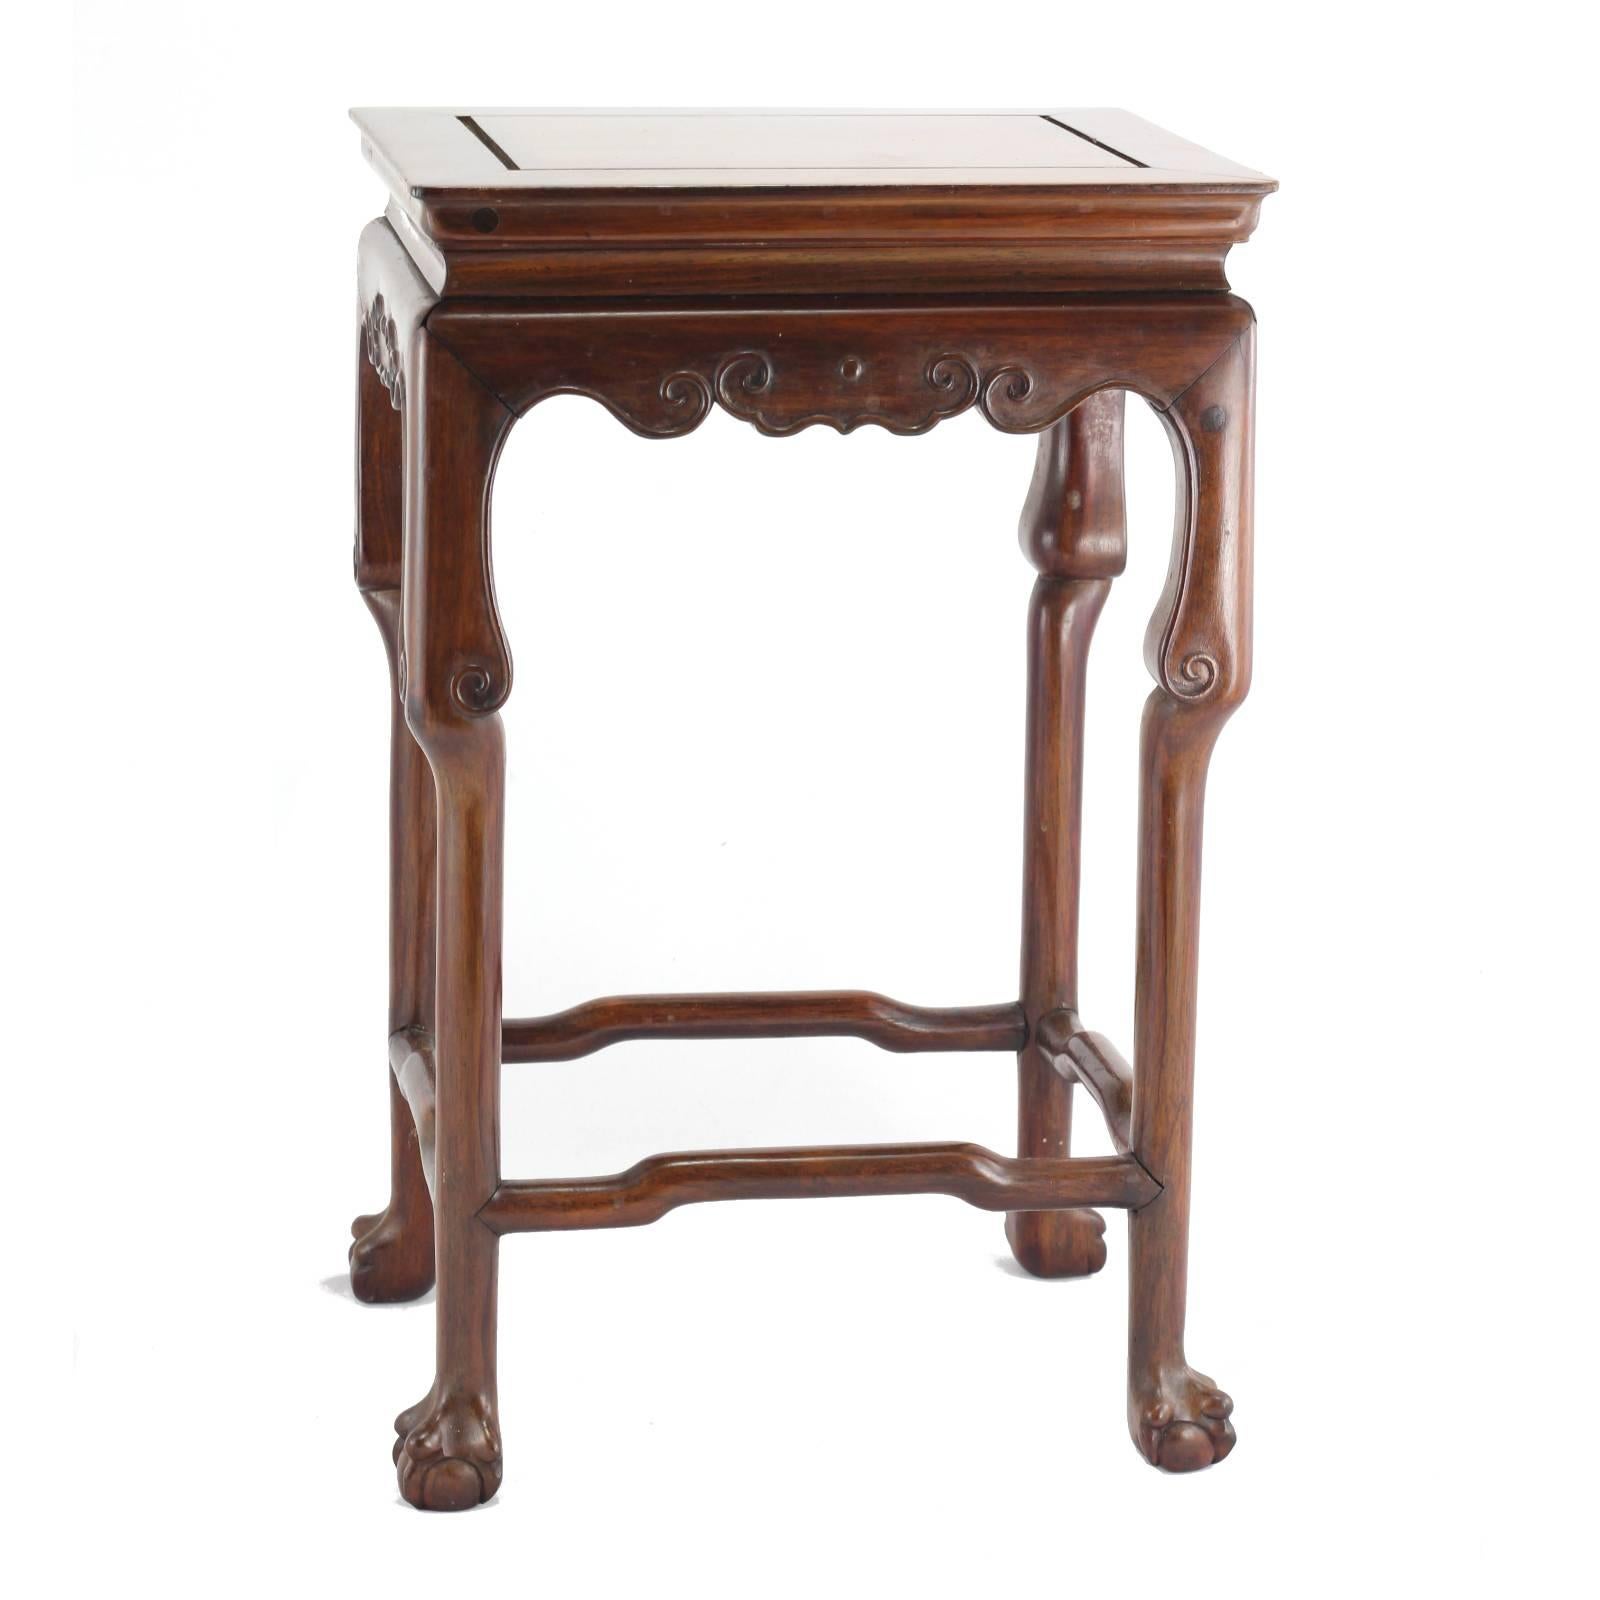 A set of three Chinese rosewood nesting tables, dating to the first quarter of the 20th century. Each table features four ball and claw feet, as well as a simple yet elegant scroll apron.